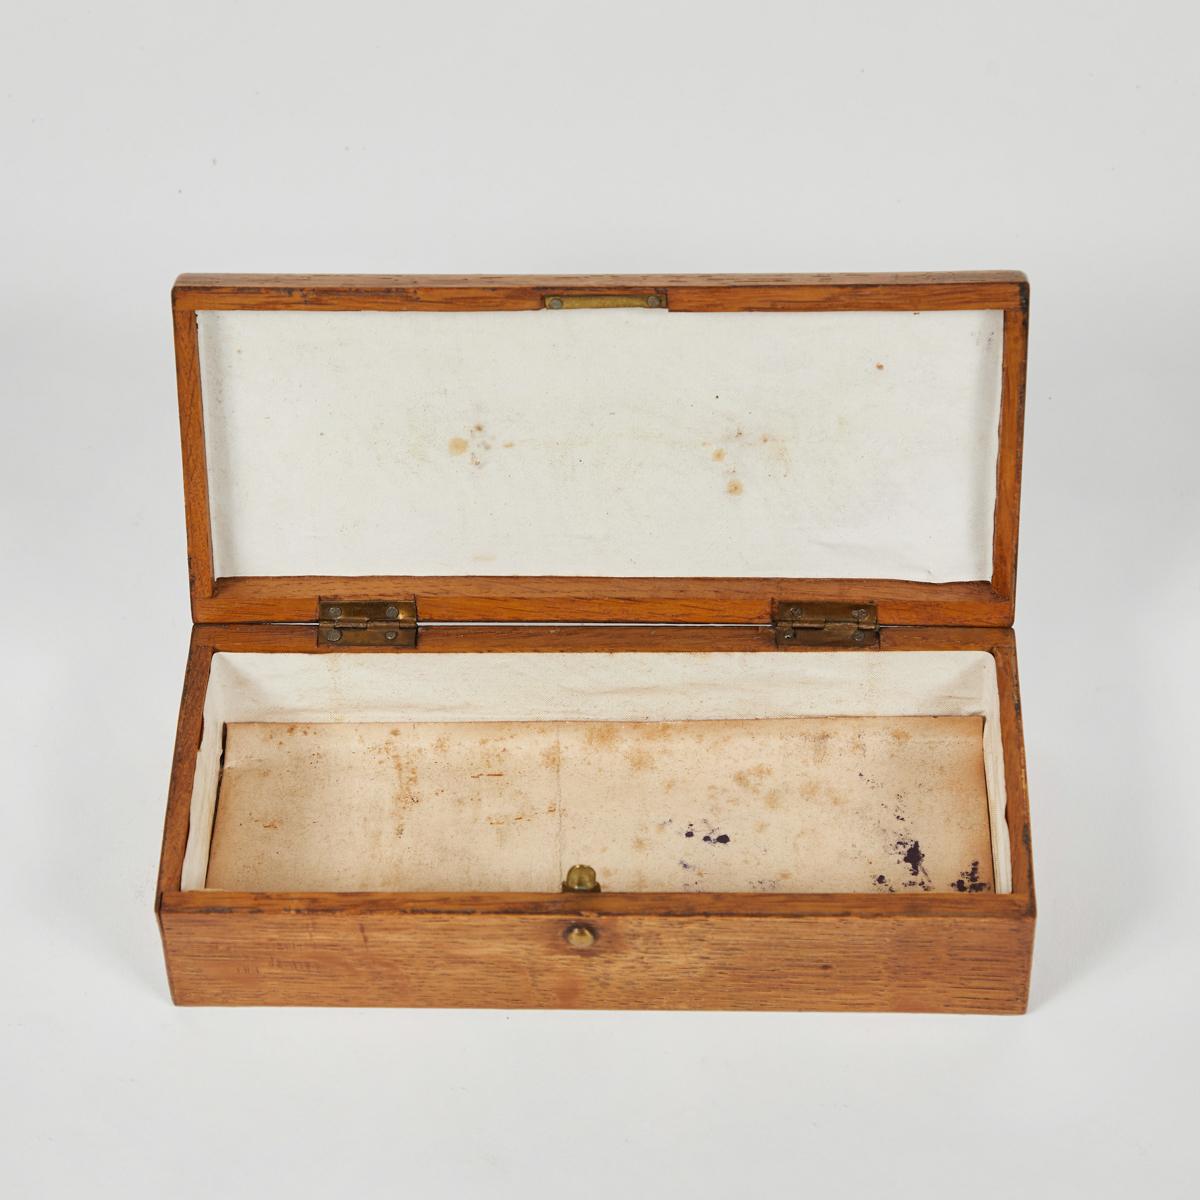 English Small Storage Box for Glasses from Late 19th Century England